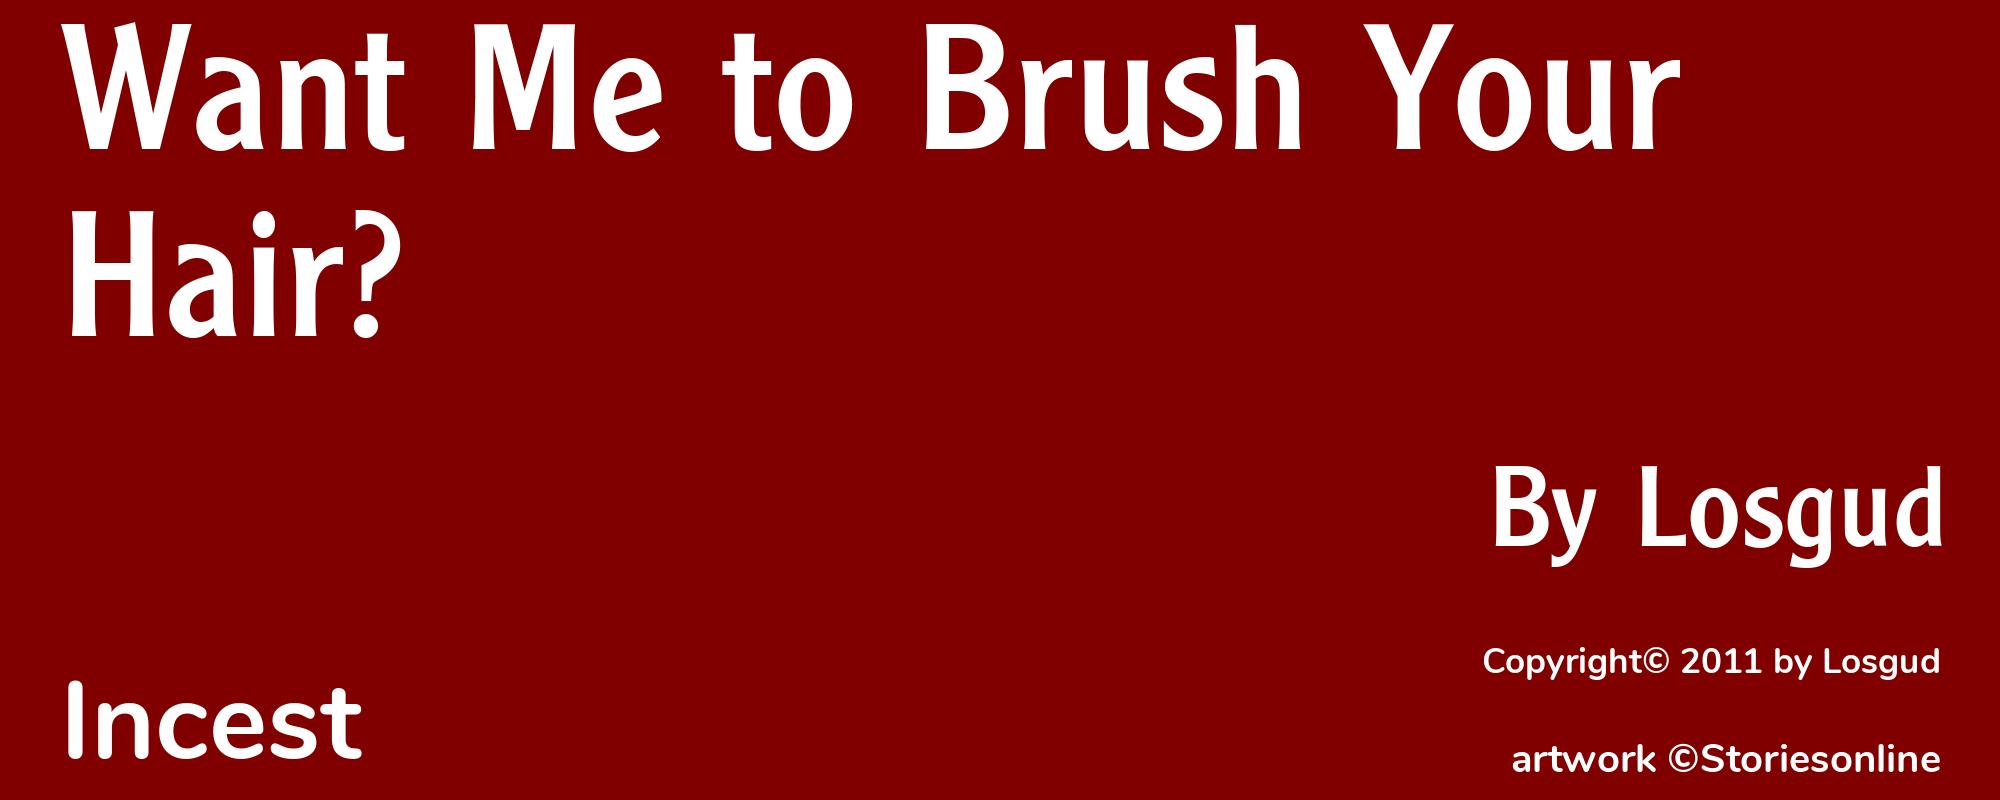 Want Me to Brush Your Hair? - Cover